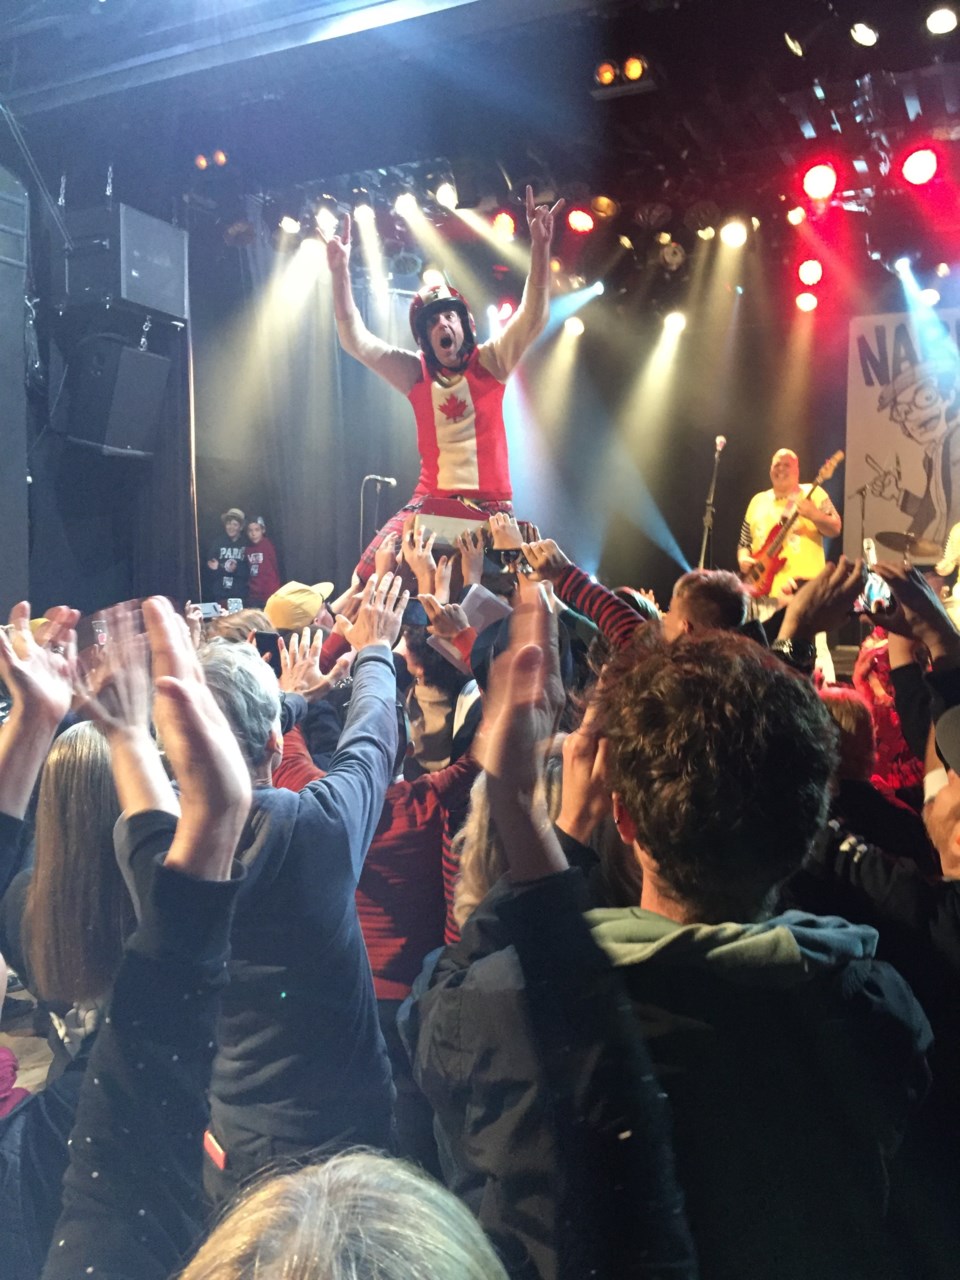 During the Evaporators’ performance Nardwuar crowd-surfed all way down the stairs of the Commodore t